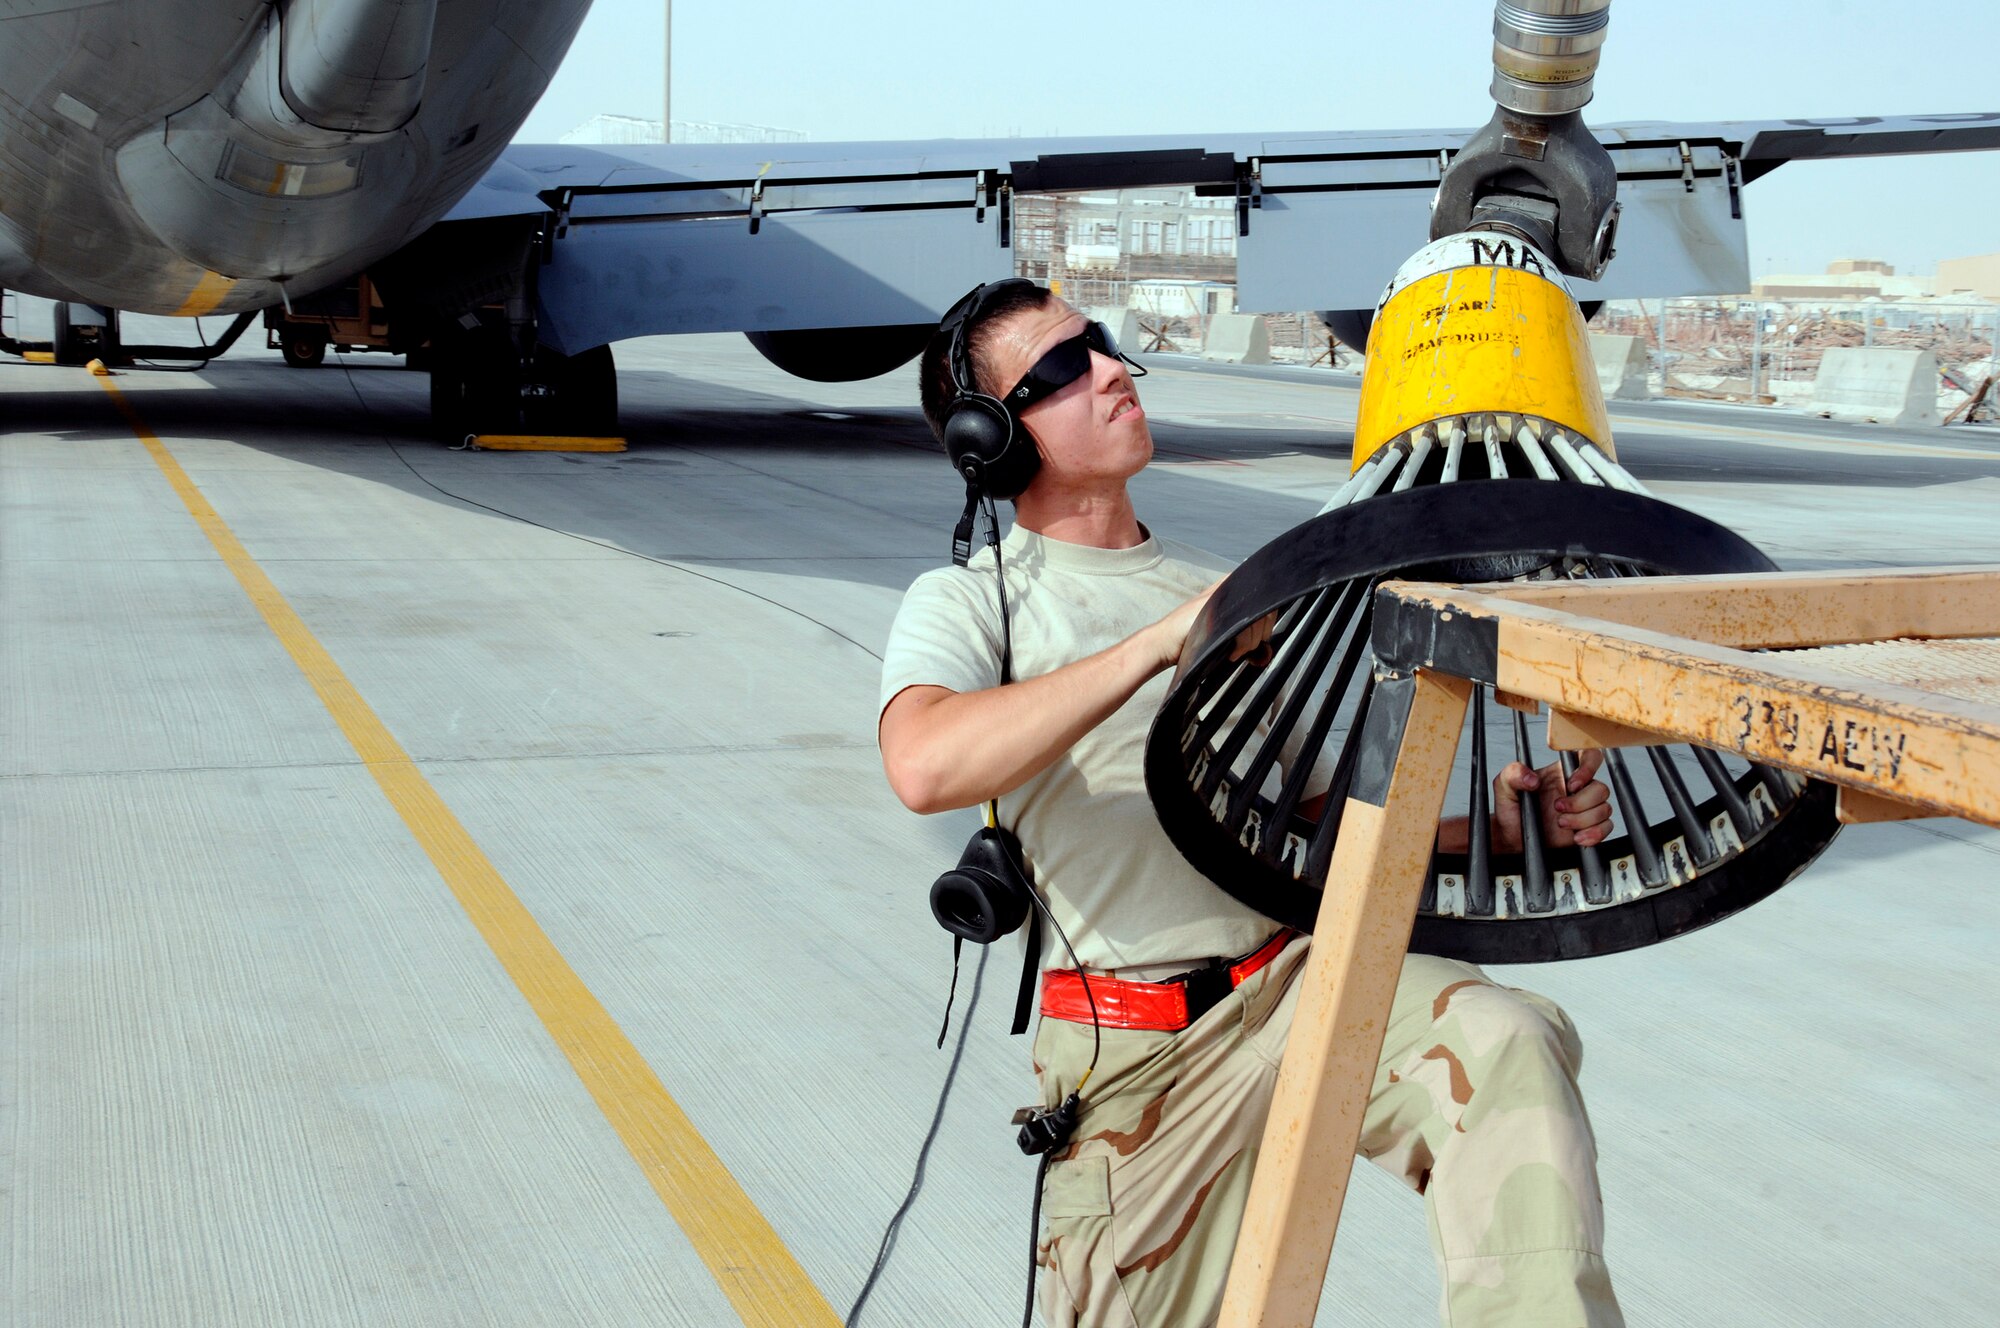 Airman 1st Class Jason Somrak, 379th Expeditionary Aircraft Maintenance Squadron, 340th Aircraft Maintenance Unit, muscles the KC-135 refueling pod off of the stand Sept.9, 2008.  The moving of the pod from the stand is one of the early steps on the pre-flight checklist here at this undisclosed air base in Southwest Asia.  The KC-135 provides aerial refueling support to Air Force, Navy, Marine Corps and allied nation aircraft engaged in Operations Iraqi and Enduring Freedom and Joint Task Force-Horn of Africa. Airman Somrak, a native of Colfax, La., is deployed from McConnell AFB, Kan. (U.S. Air Force photo by Tech. Sgt. Michael Boquette/Released)